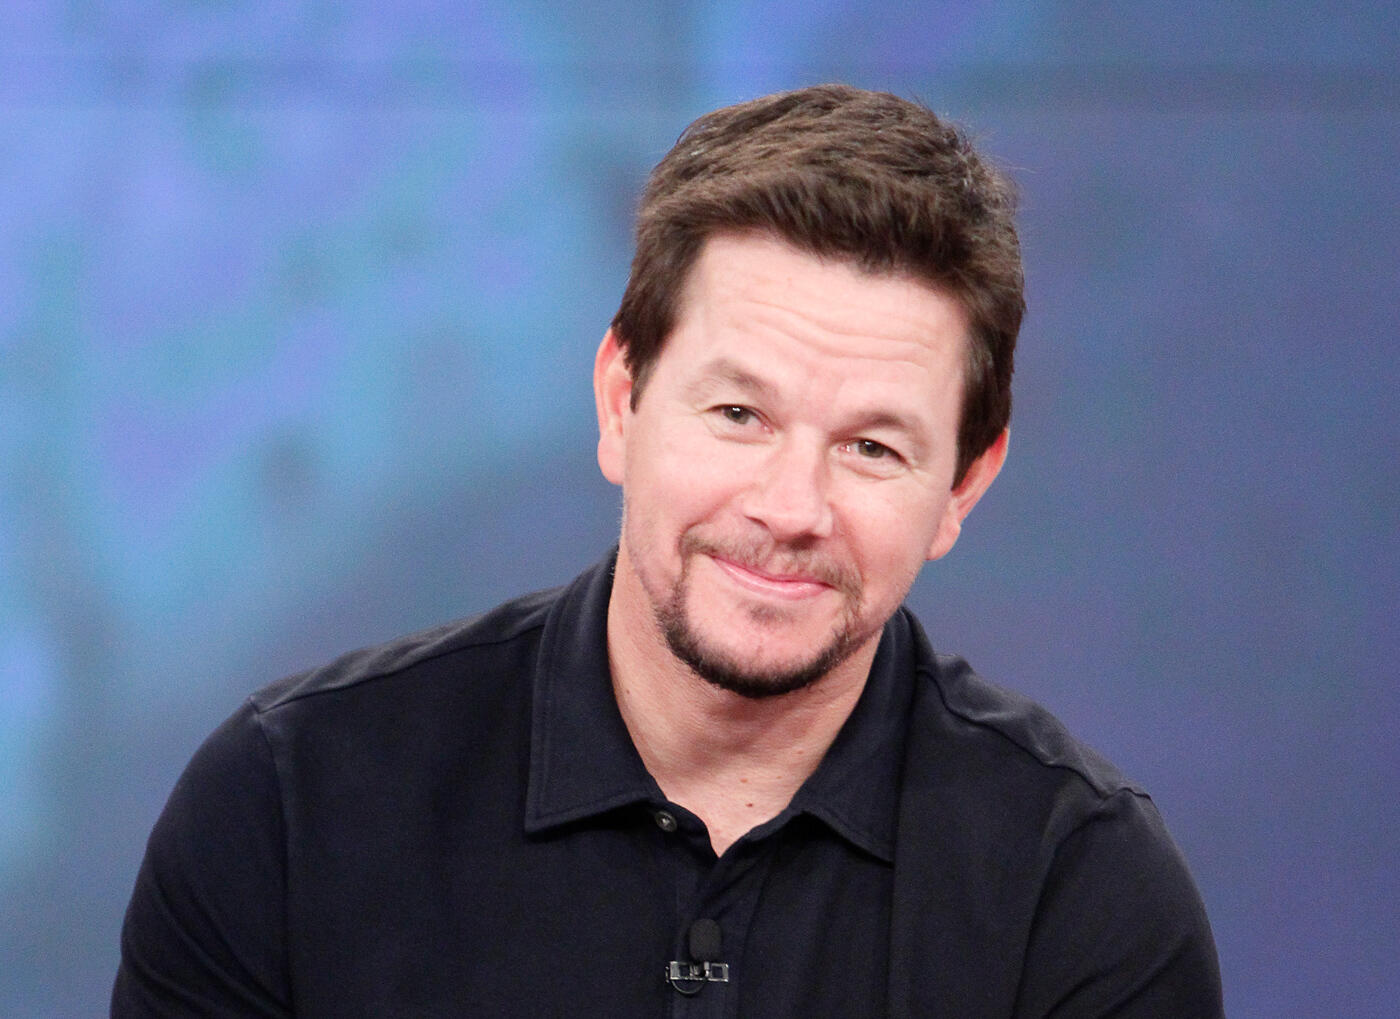 THE VIEW - Mark Wahlberg and Actors Omari Hardwick and Naturi Naughton are the guests Friday, June 26, 2015 on ABC's 